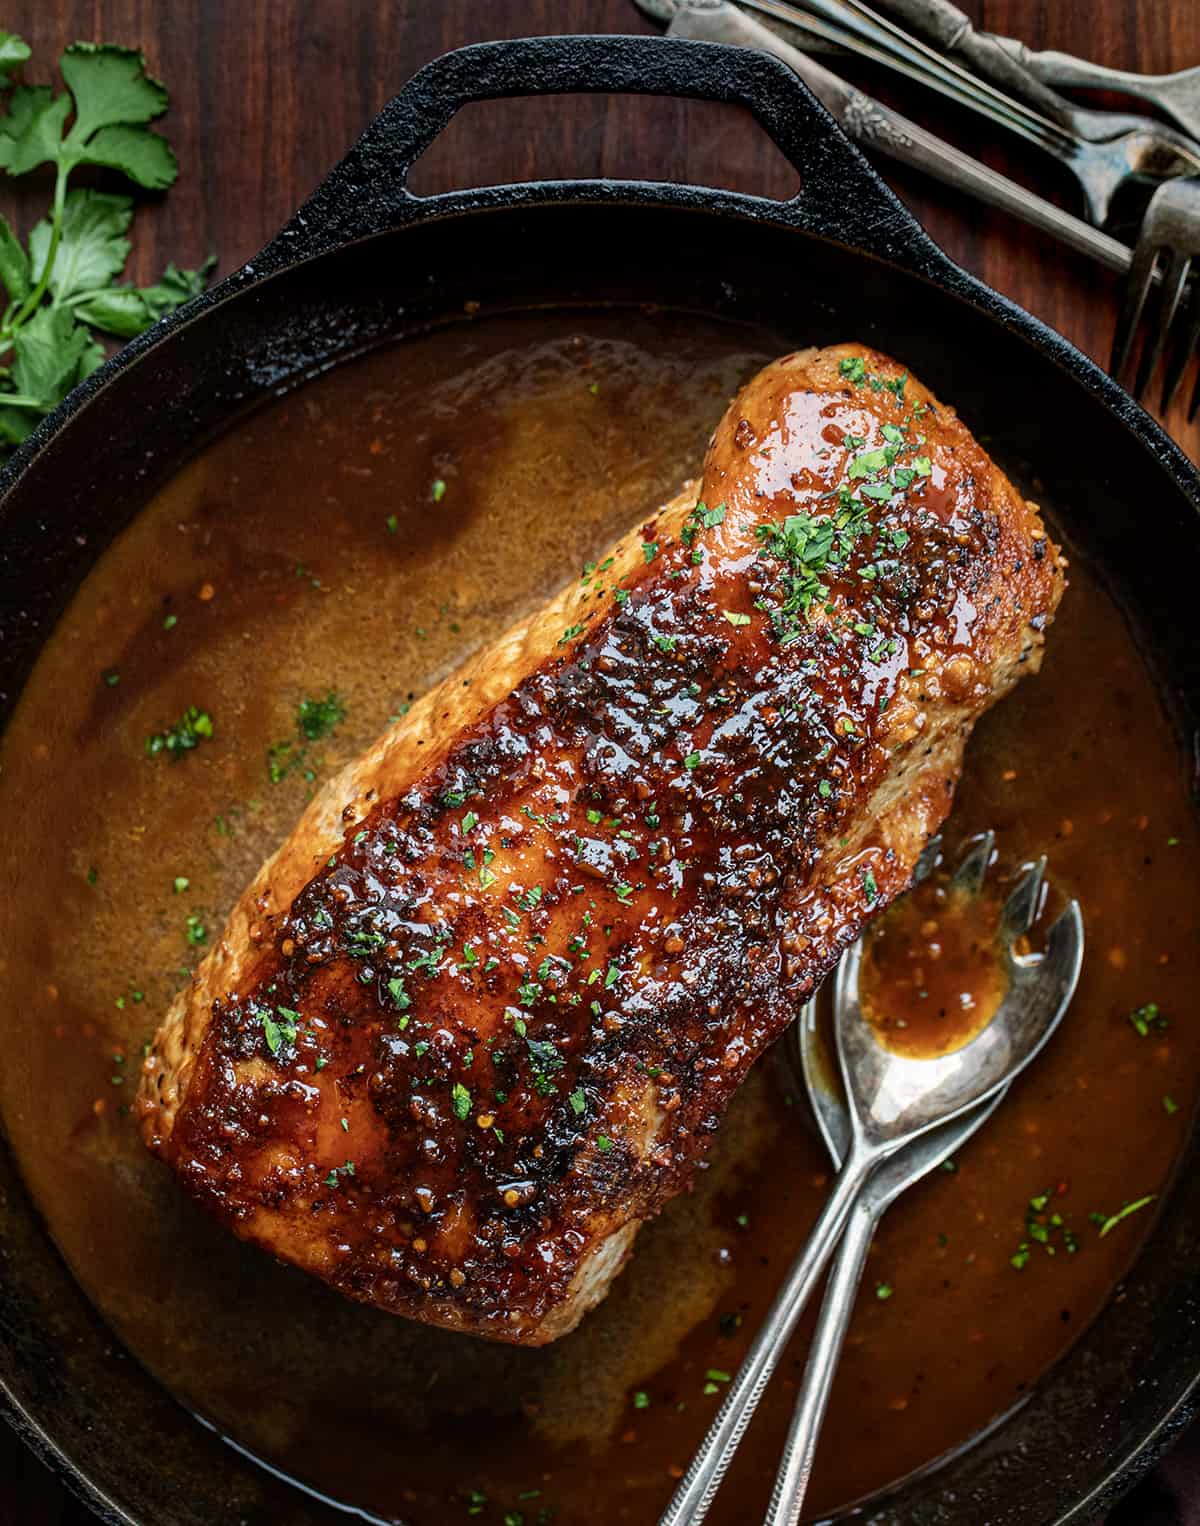 Honey Garlic Pork Loin in a Skillet on a Wooden Table from overhead.